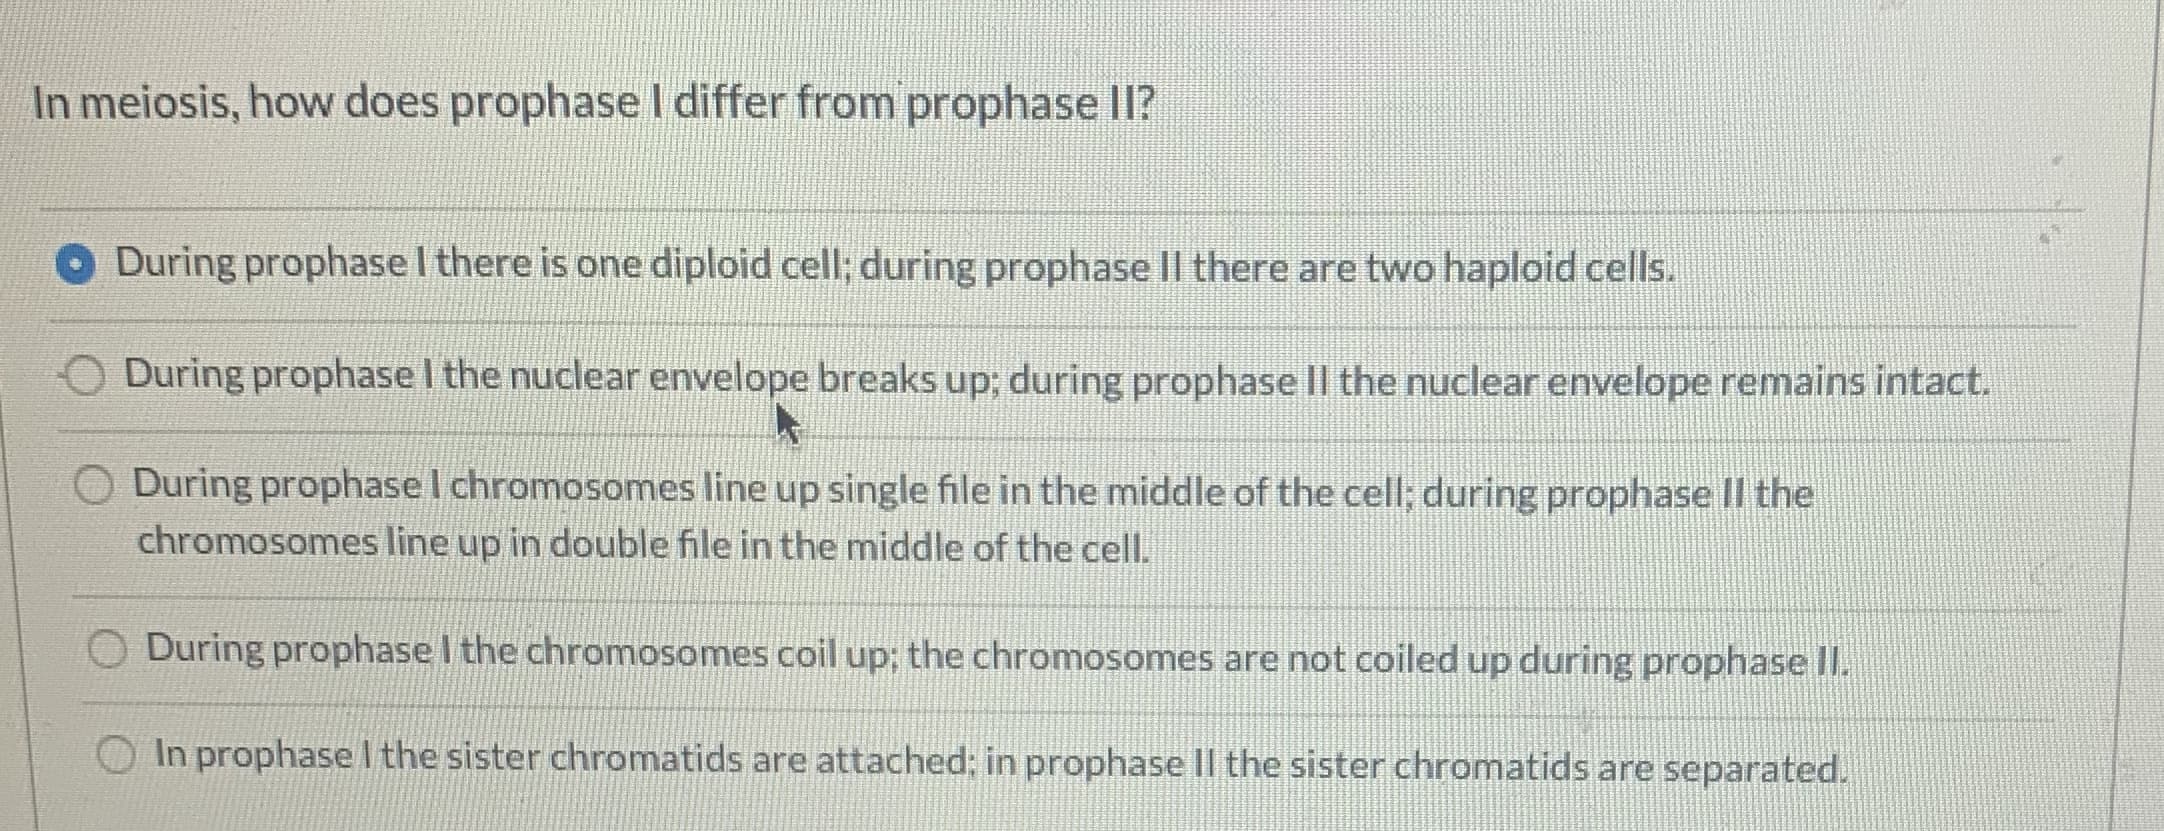 In meiosis, how does prophase I differ from prophase II?
During prophasel there is one diploid cell; during prophase II there are two haploid cells.
During prophase I the nuclear envelope breaks up; during prophase II the nuclear envelope remains intact.
O During prophase I chromosomes line up single file in the middle of the cell; during prophase II the
chromosomes line up in double file in the middle of the cell.
During prophase I the chromosomes coil up; the chromosomes are not coiled up during prophase II.
In prophase I the sister chromatids are attached; in prophase II the sister chromatids are separated.
